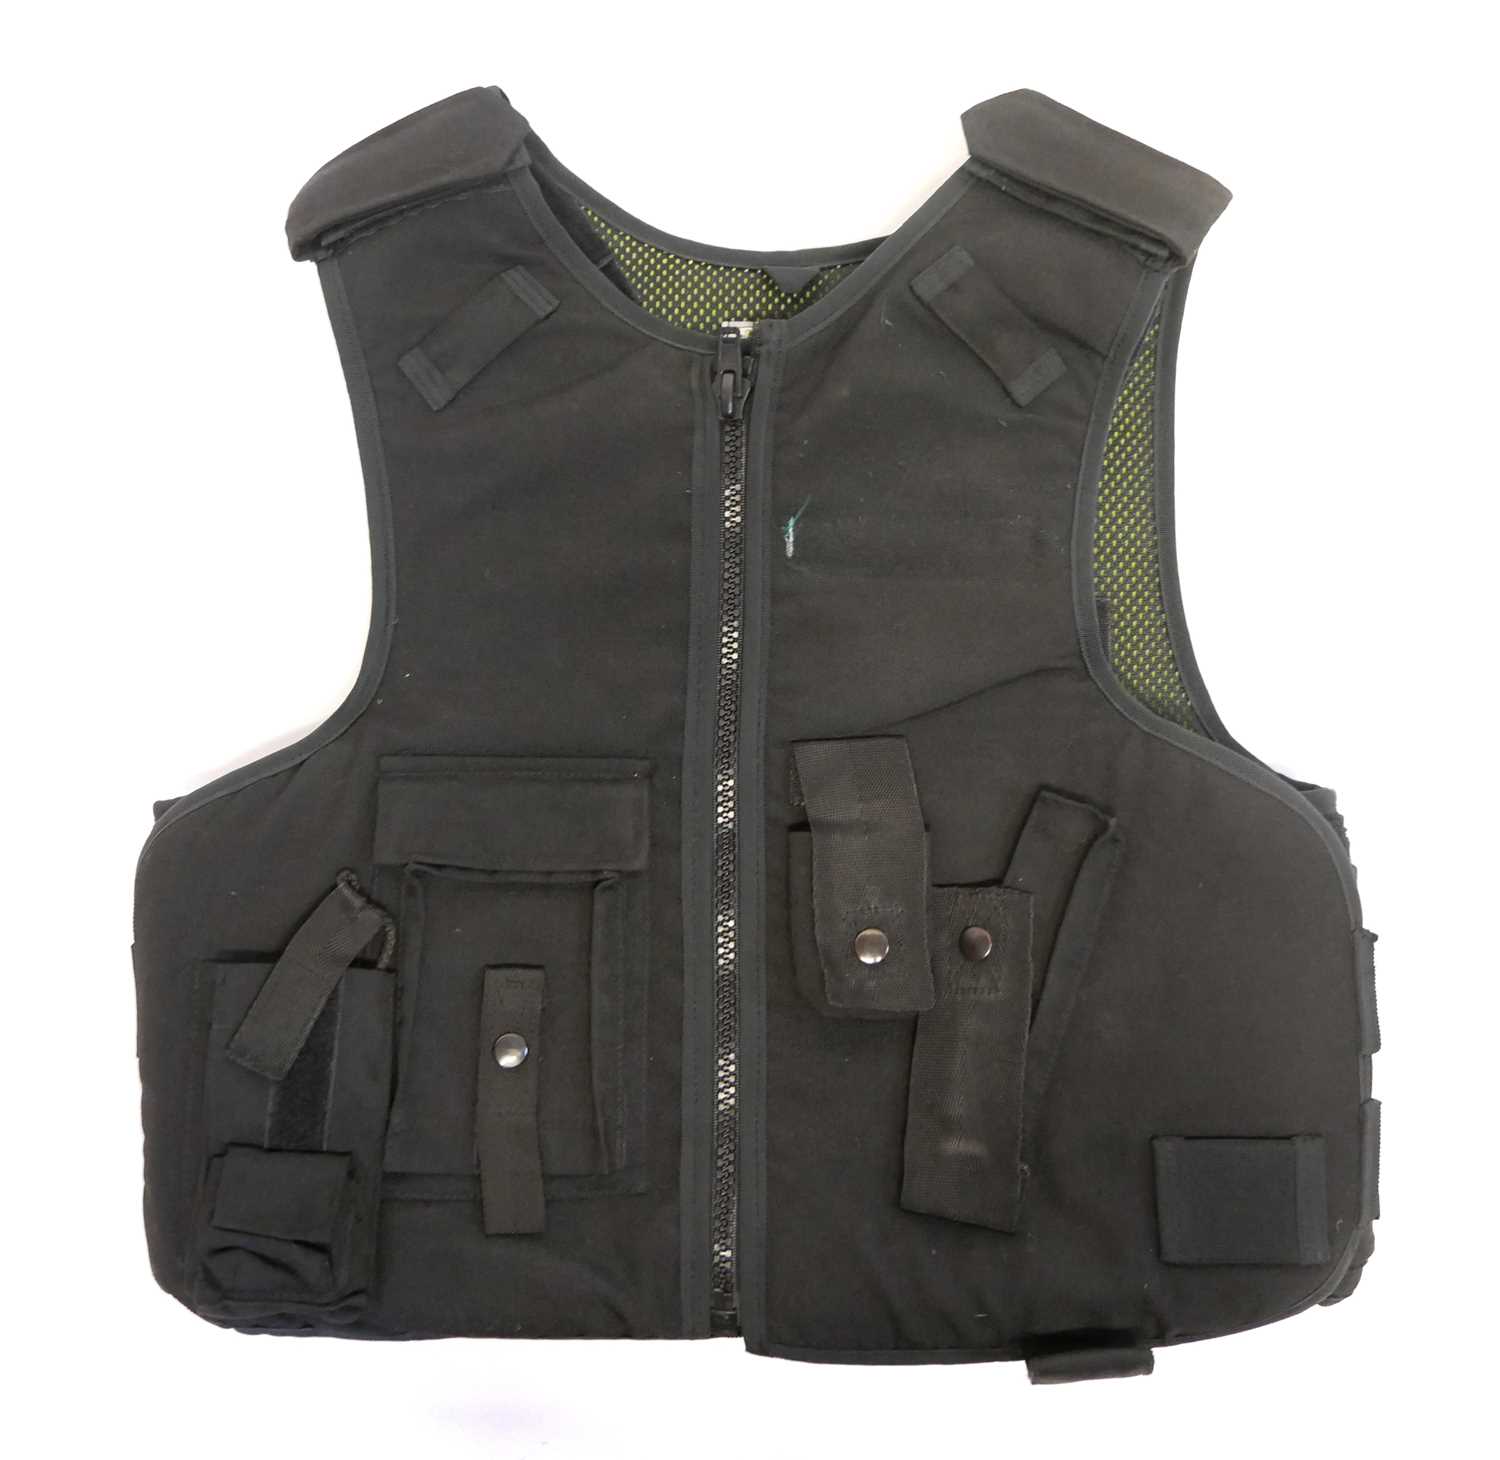 A Highmark dual-purpose (ballistic & stab protection) body armour in carrying bag. The jacket is